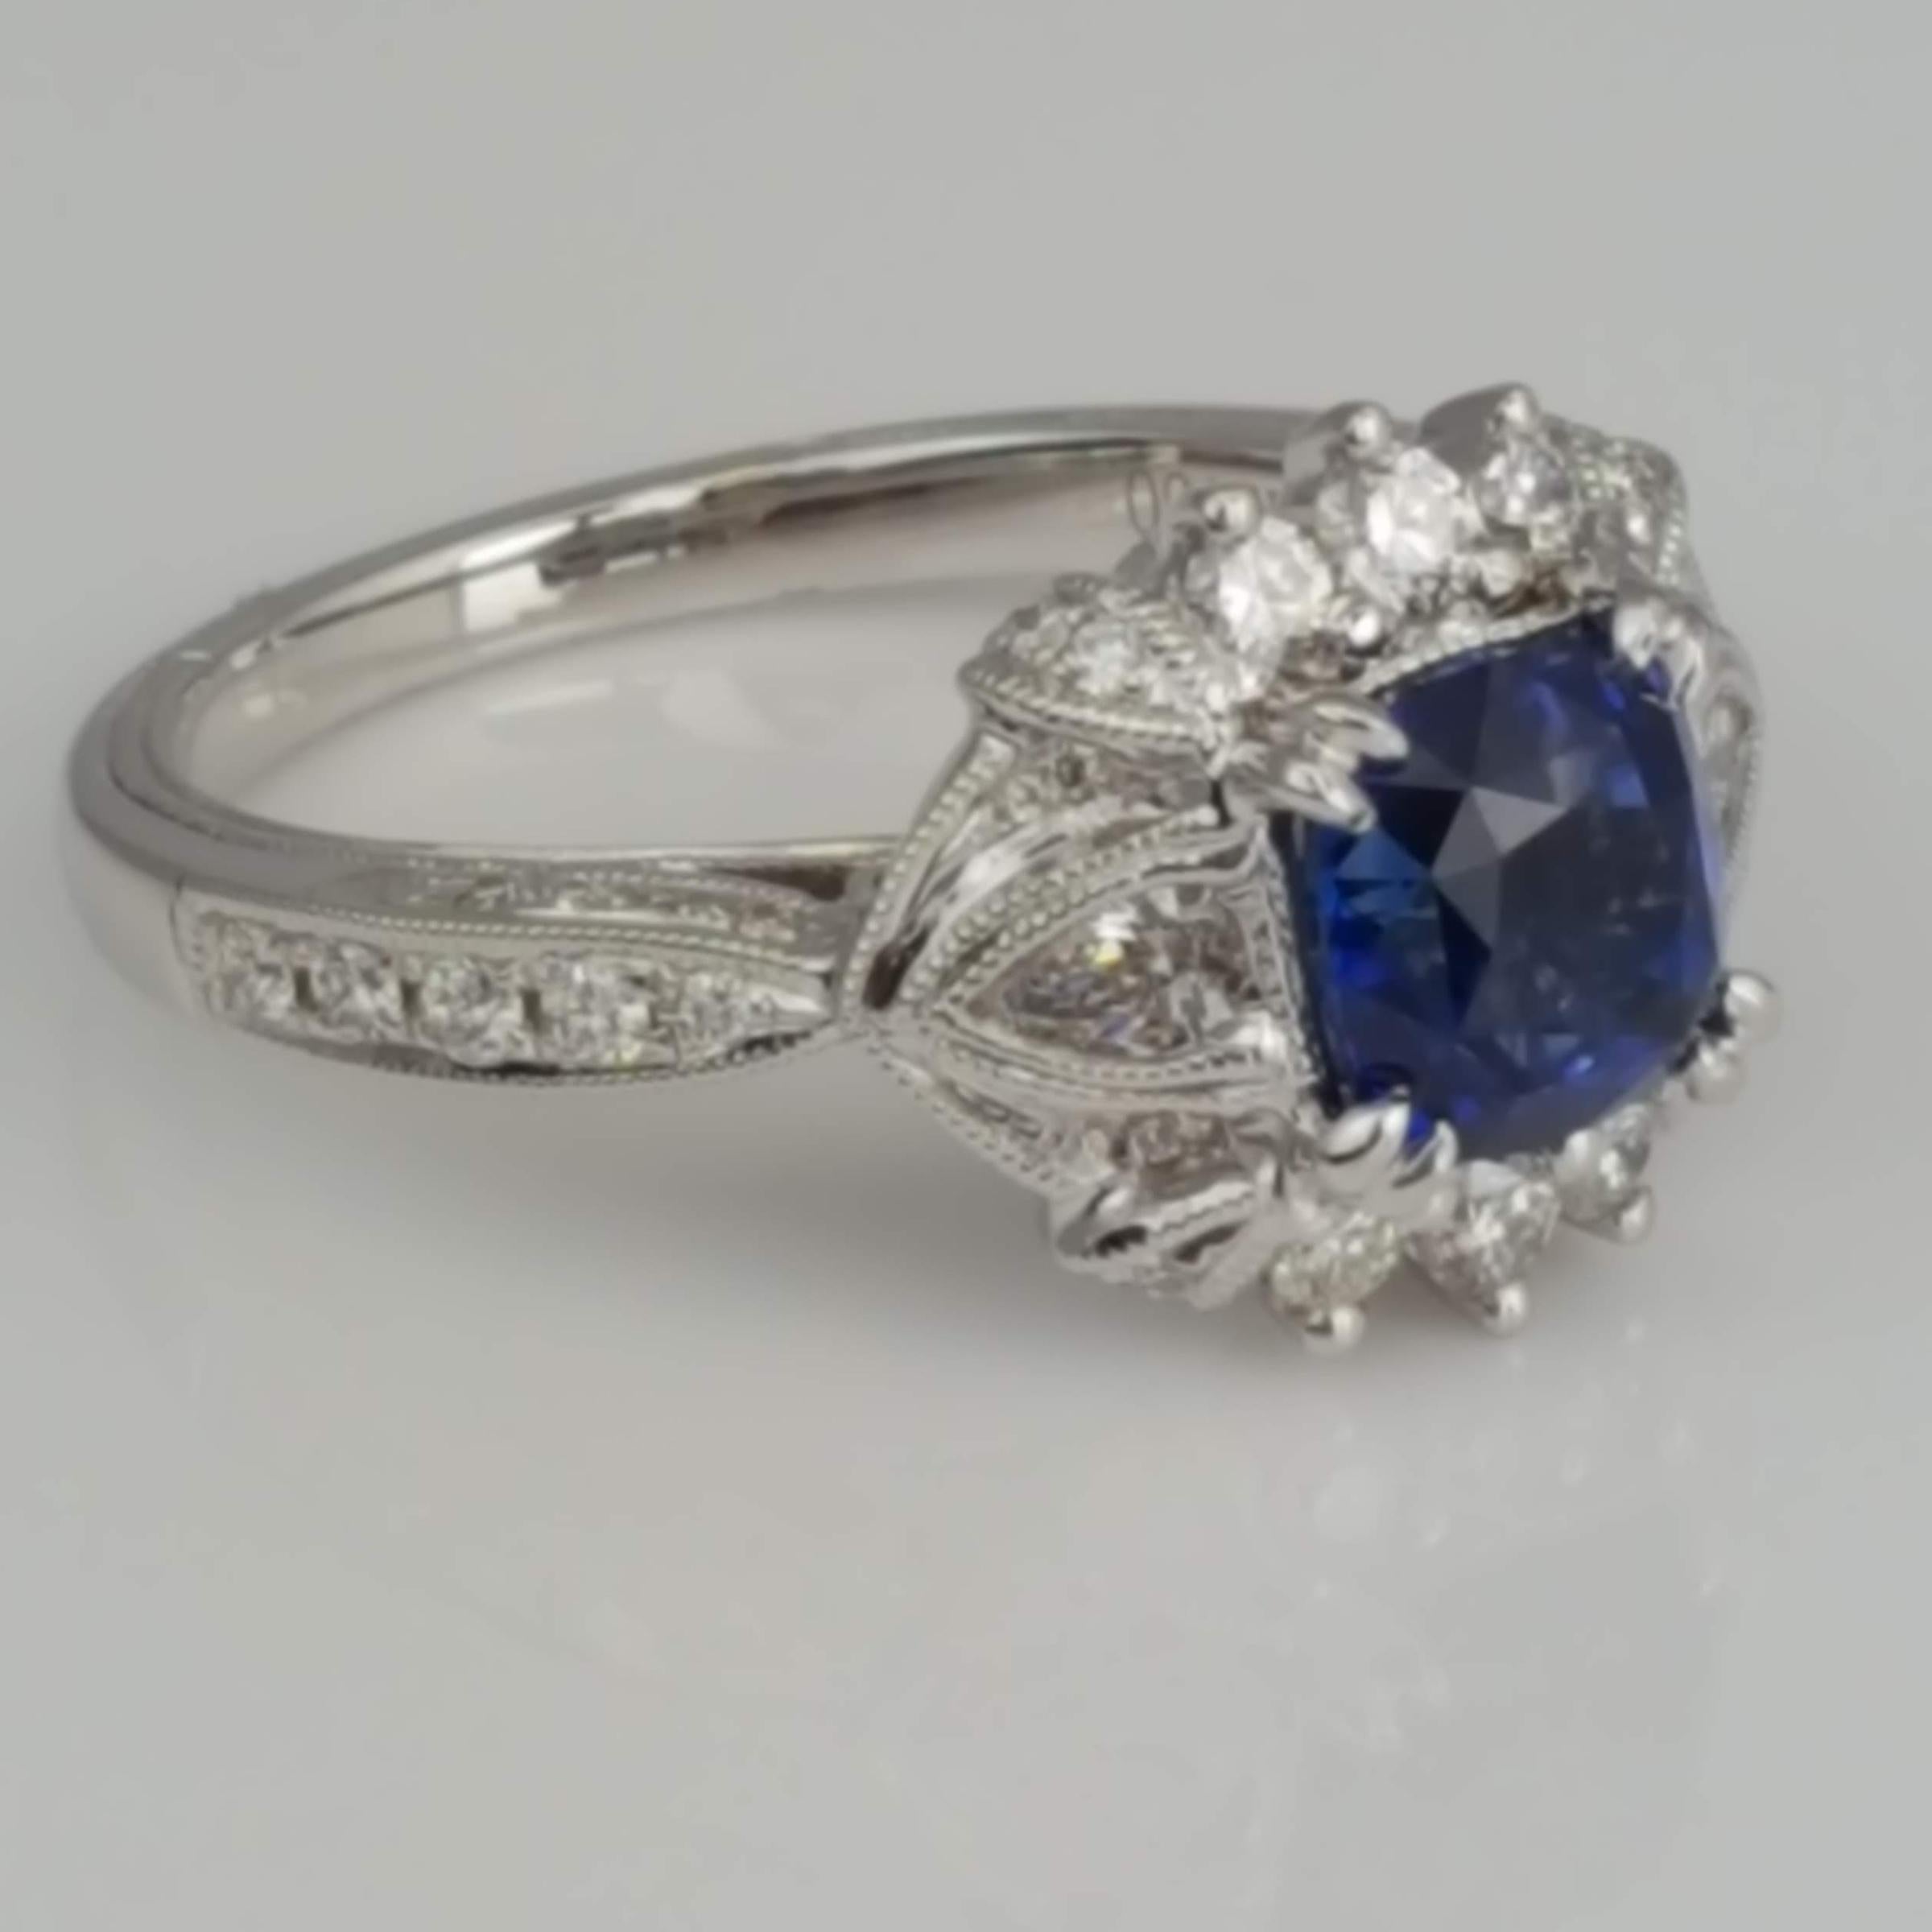 1.6 Carat Cushion Cut Blue Sapphire Ring with 0.63 Carat Natural Diamond ref1364 In New Condition For Sale In New York, NY